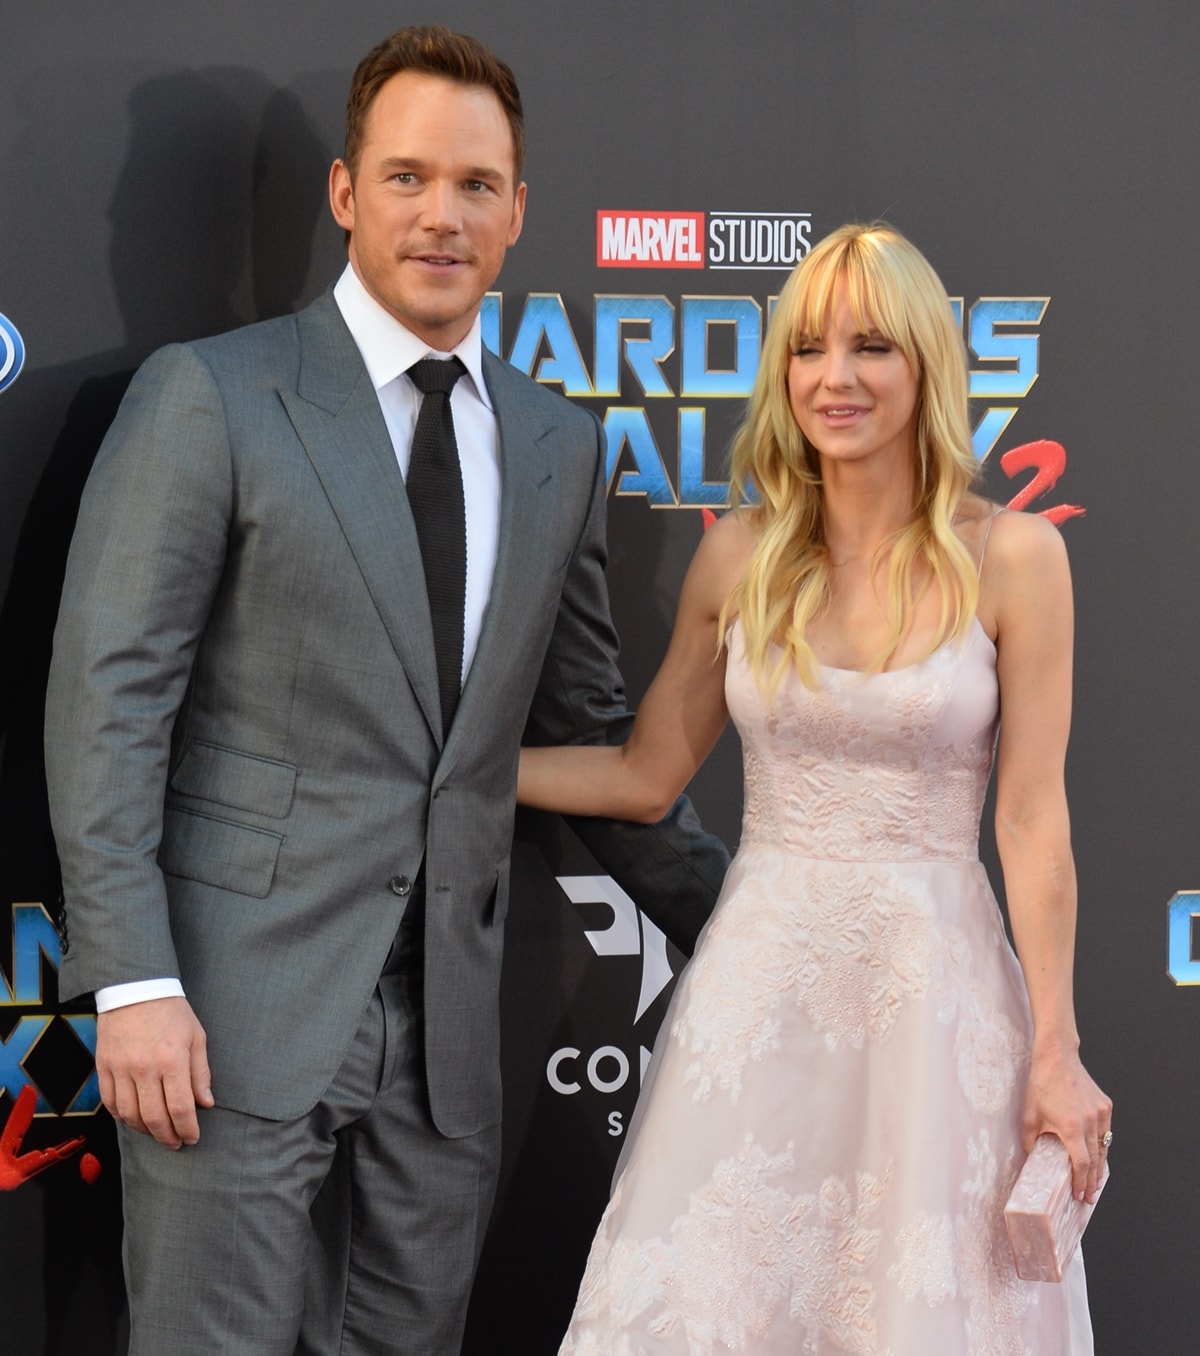 Chris Pratt and Anna Faris married in 2009 and divorced in 2018